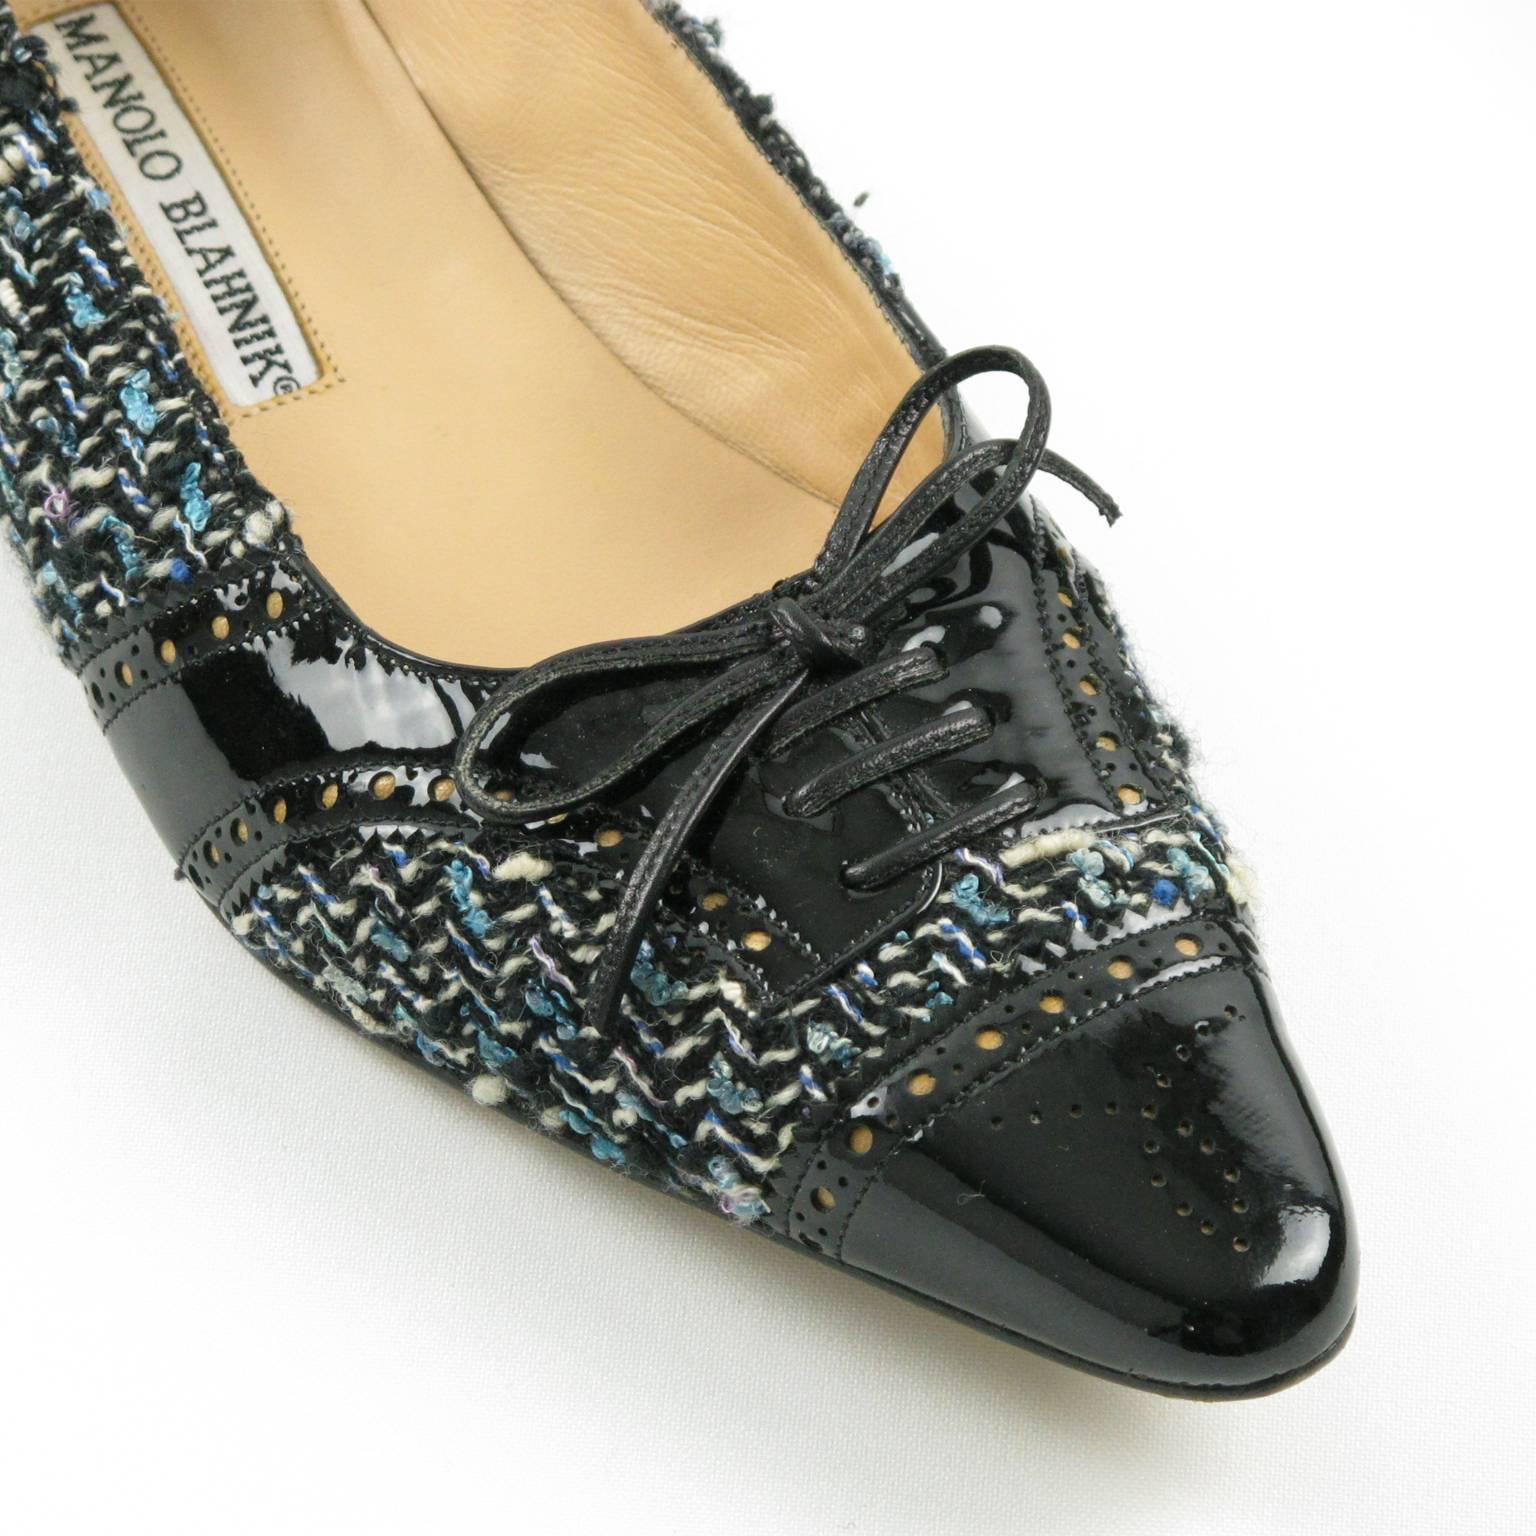 Manolo Blahnik Black Patent Leather and Tweed Fabric Flats Shoes Size 37.5 / 7.5 4